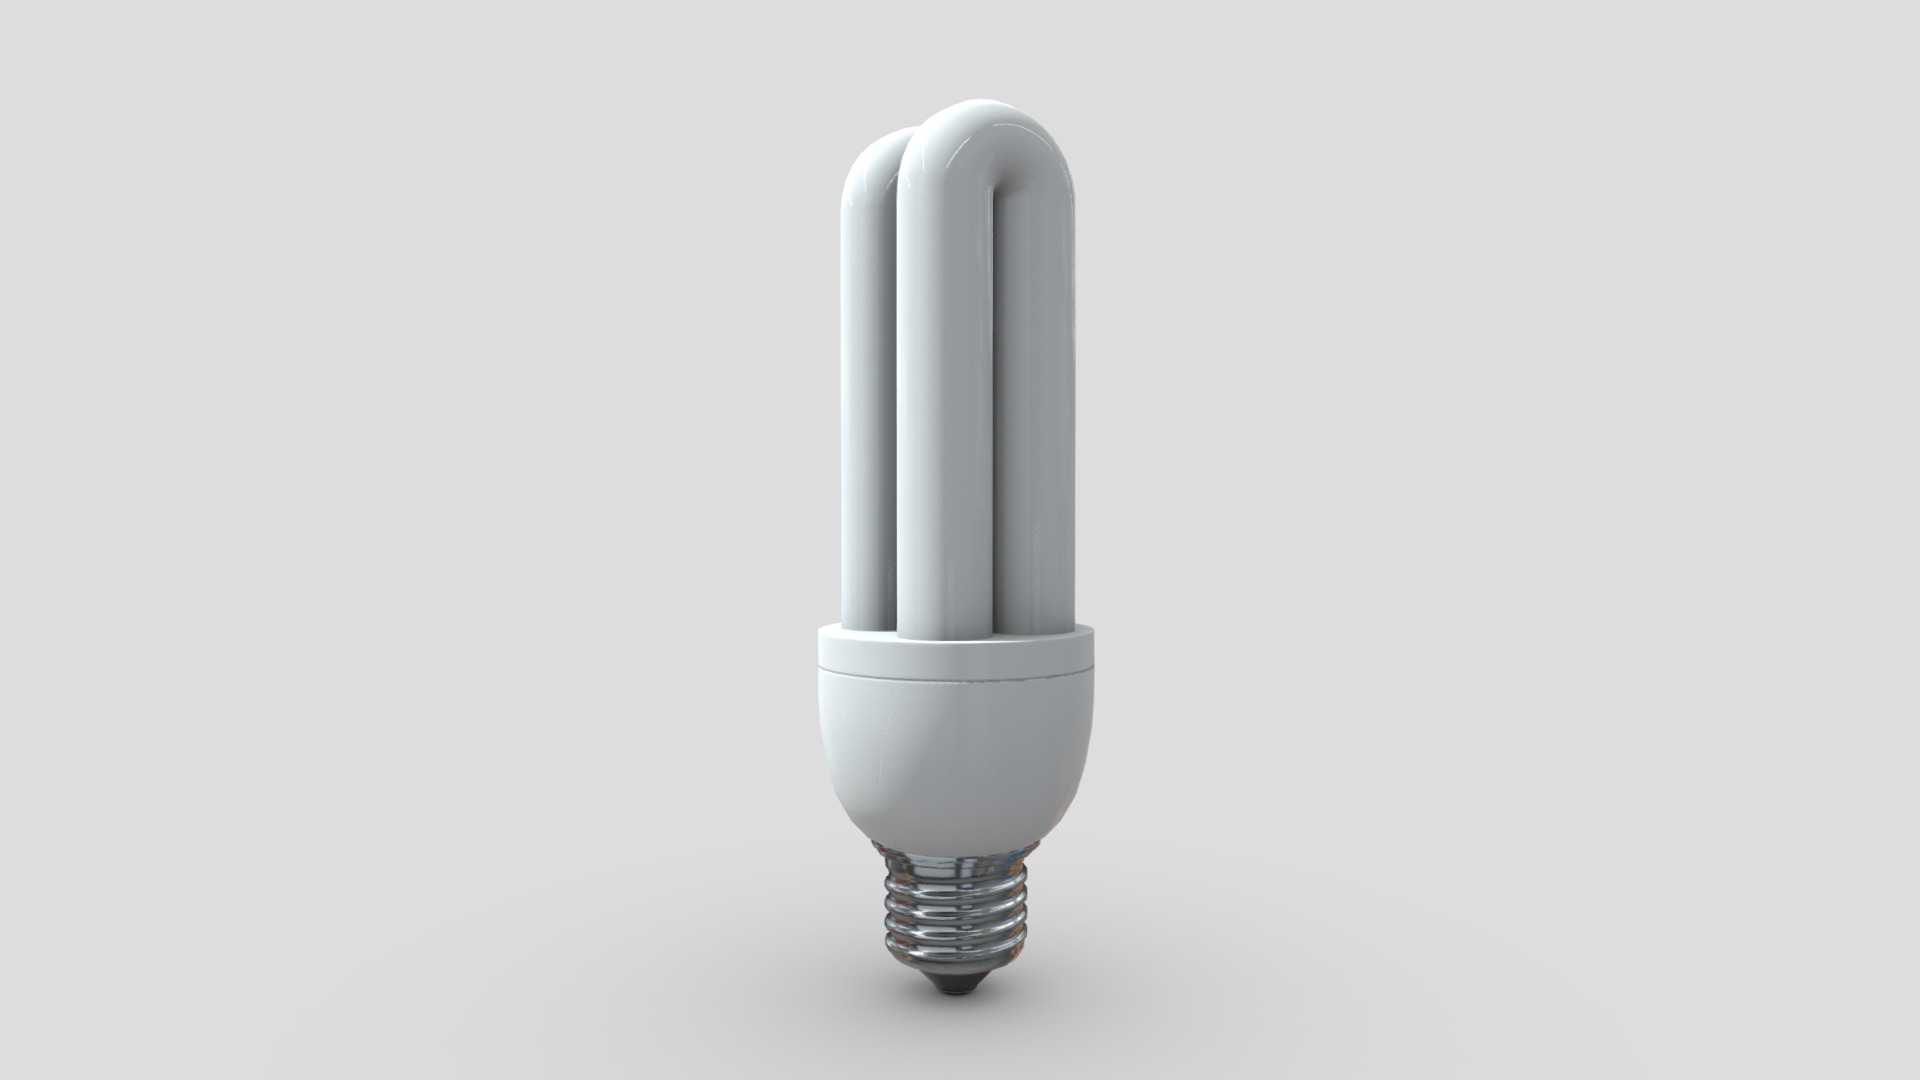 3D model Light Bulb 2 - This is a 3D model of the Light Bulb 2. The 3D model is about a white light bulb.